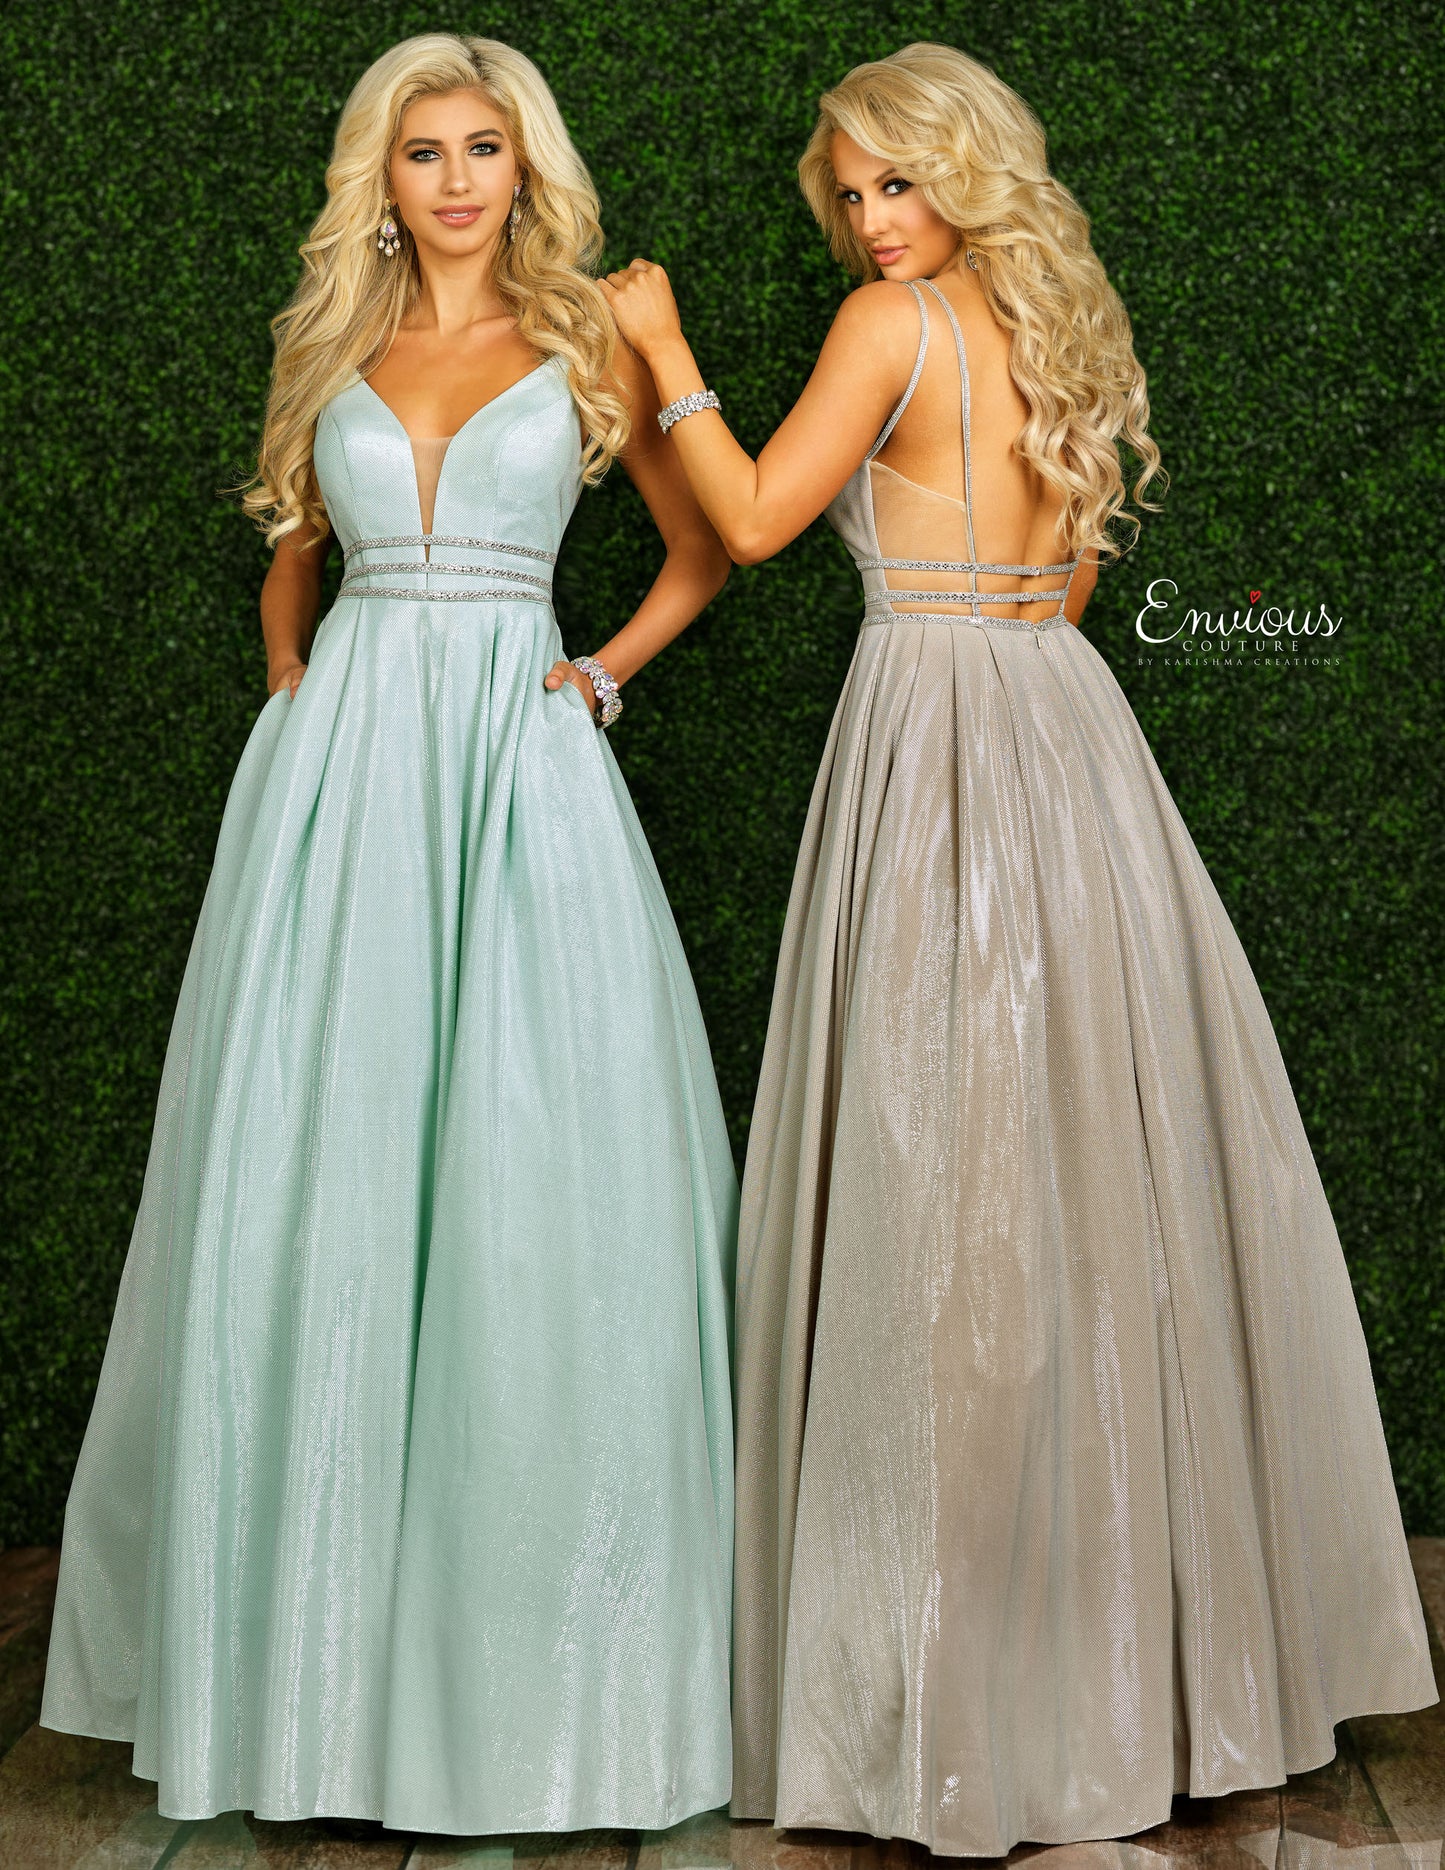 Envious Couture 1441 Size 10 Iridescent Shimmer Mint Prom Dress Ball Gown Metallic Plunging Neckline